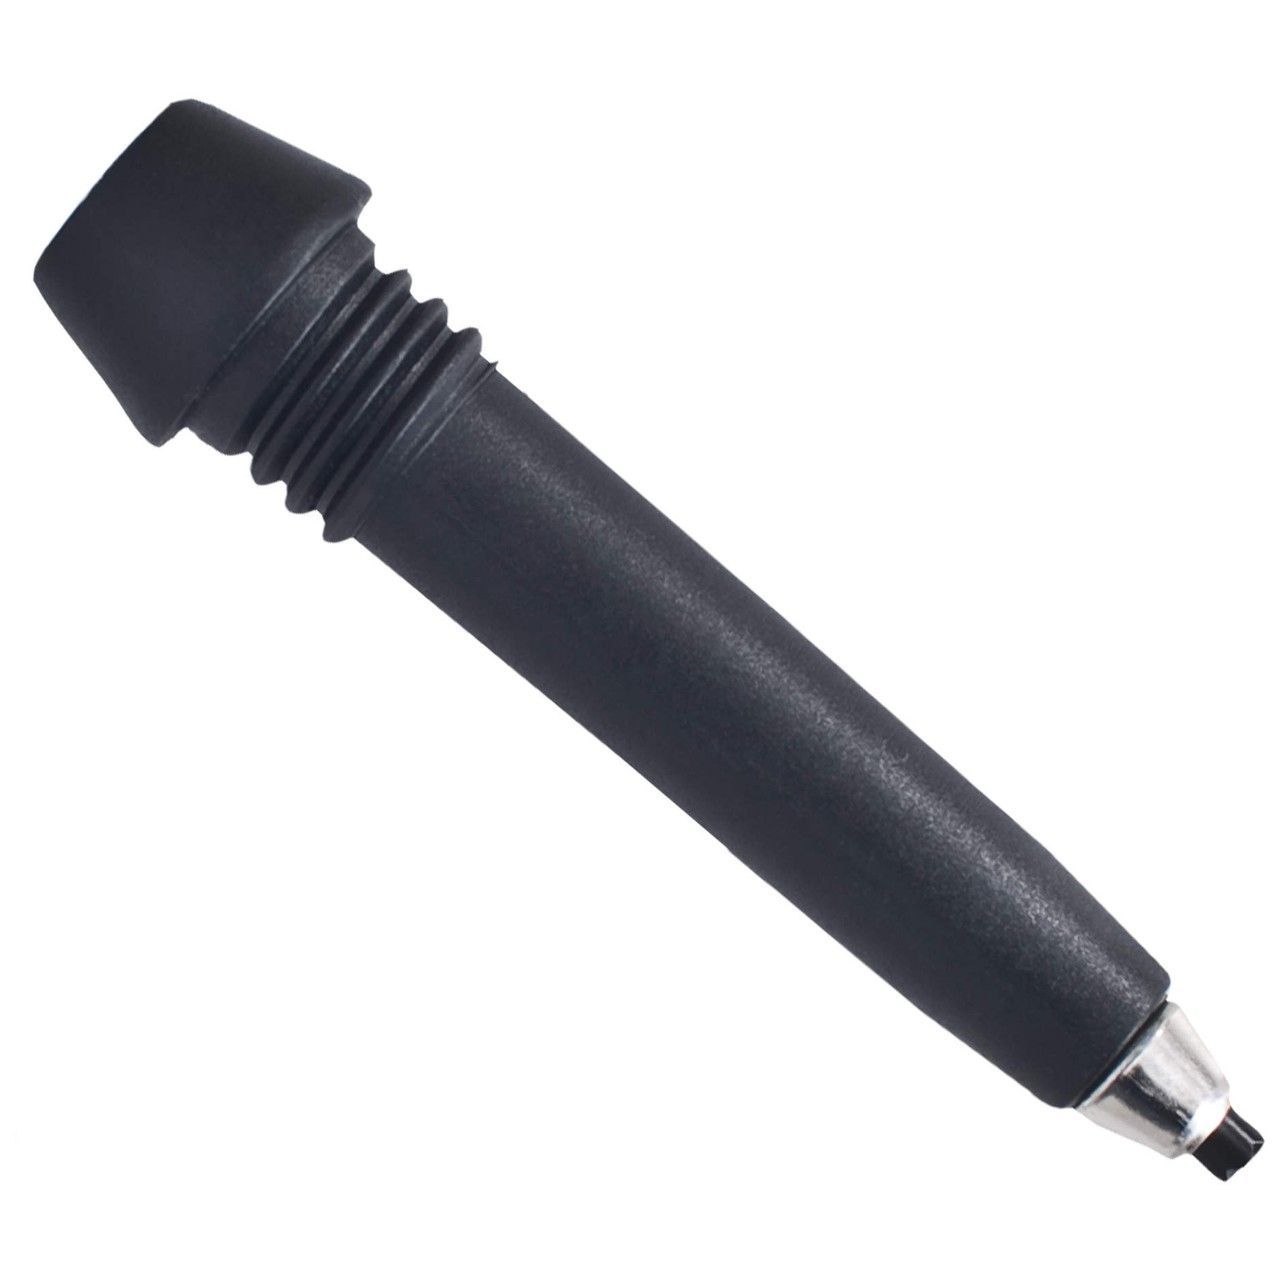 Material: 50% synthetic and 50% carbide. Trekking Pole Accessory. Carbide Steel Tip. Pack of 2.